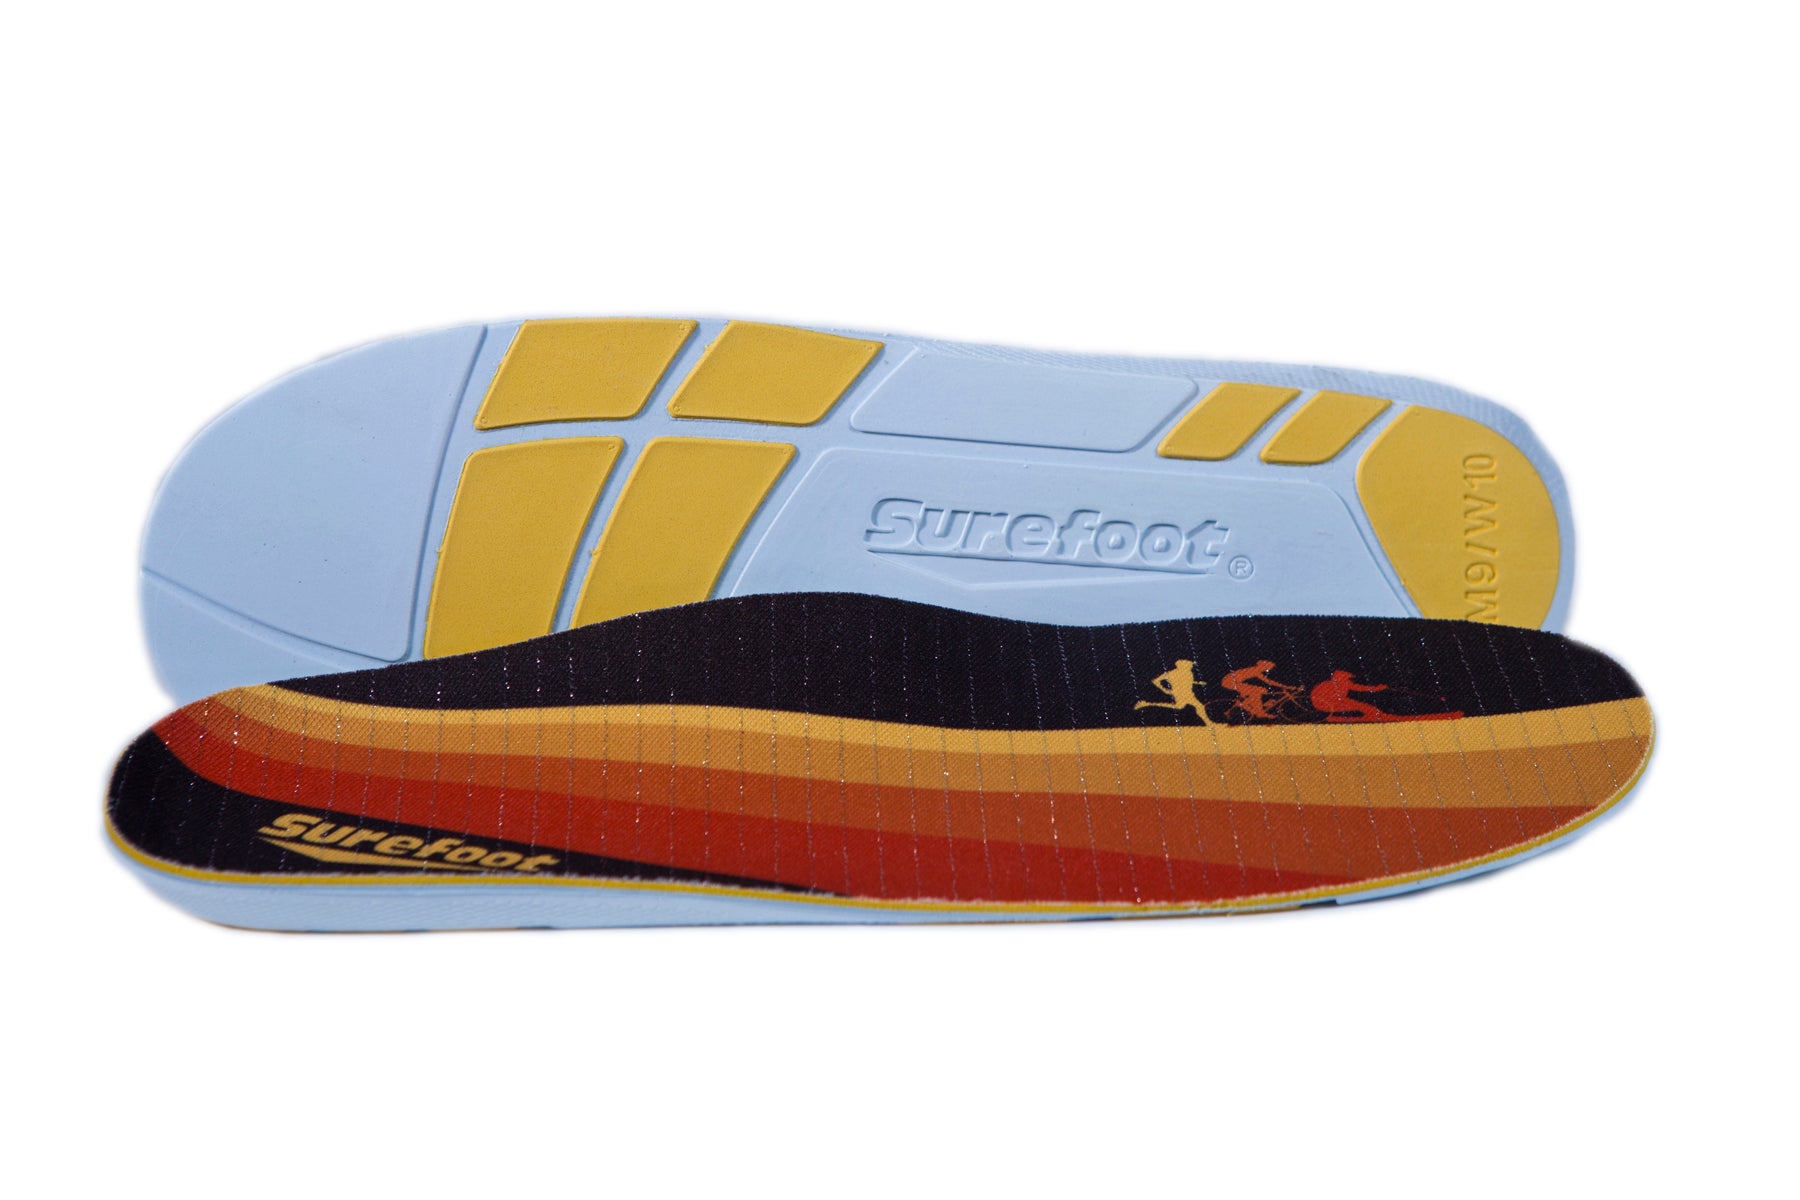 Yellow Surefoot Conforma Insole, Surefoot logo underneath and on top sheet.